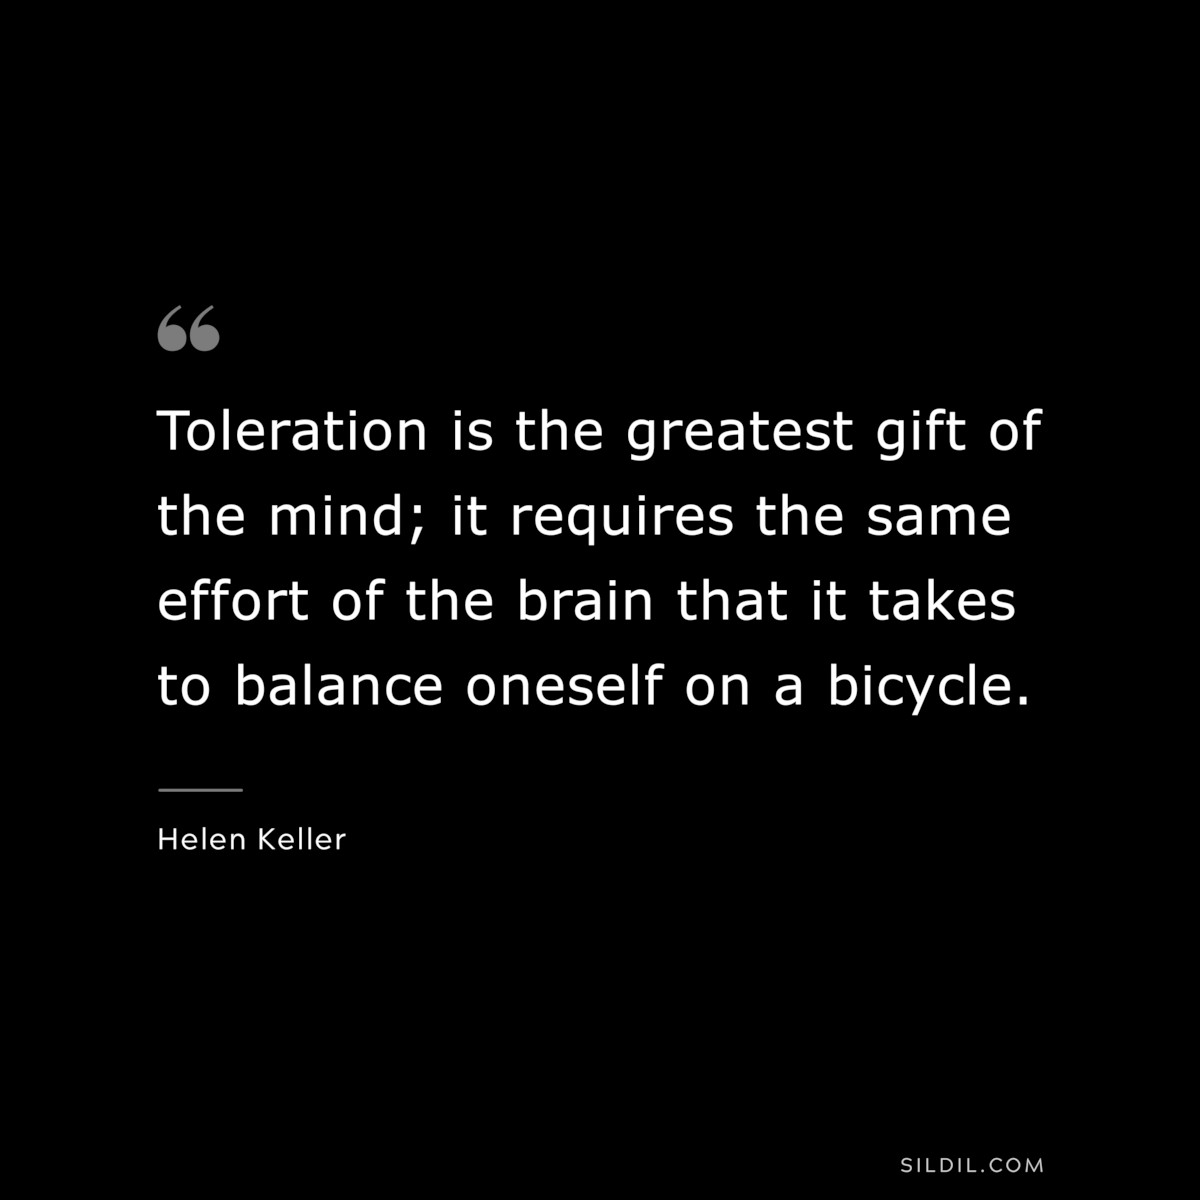 Toleration is the greatest gift of the mind; it requires the same effort of the brain that it takes to balance oneself on a bicycle. ― Helen Keller